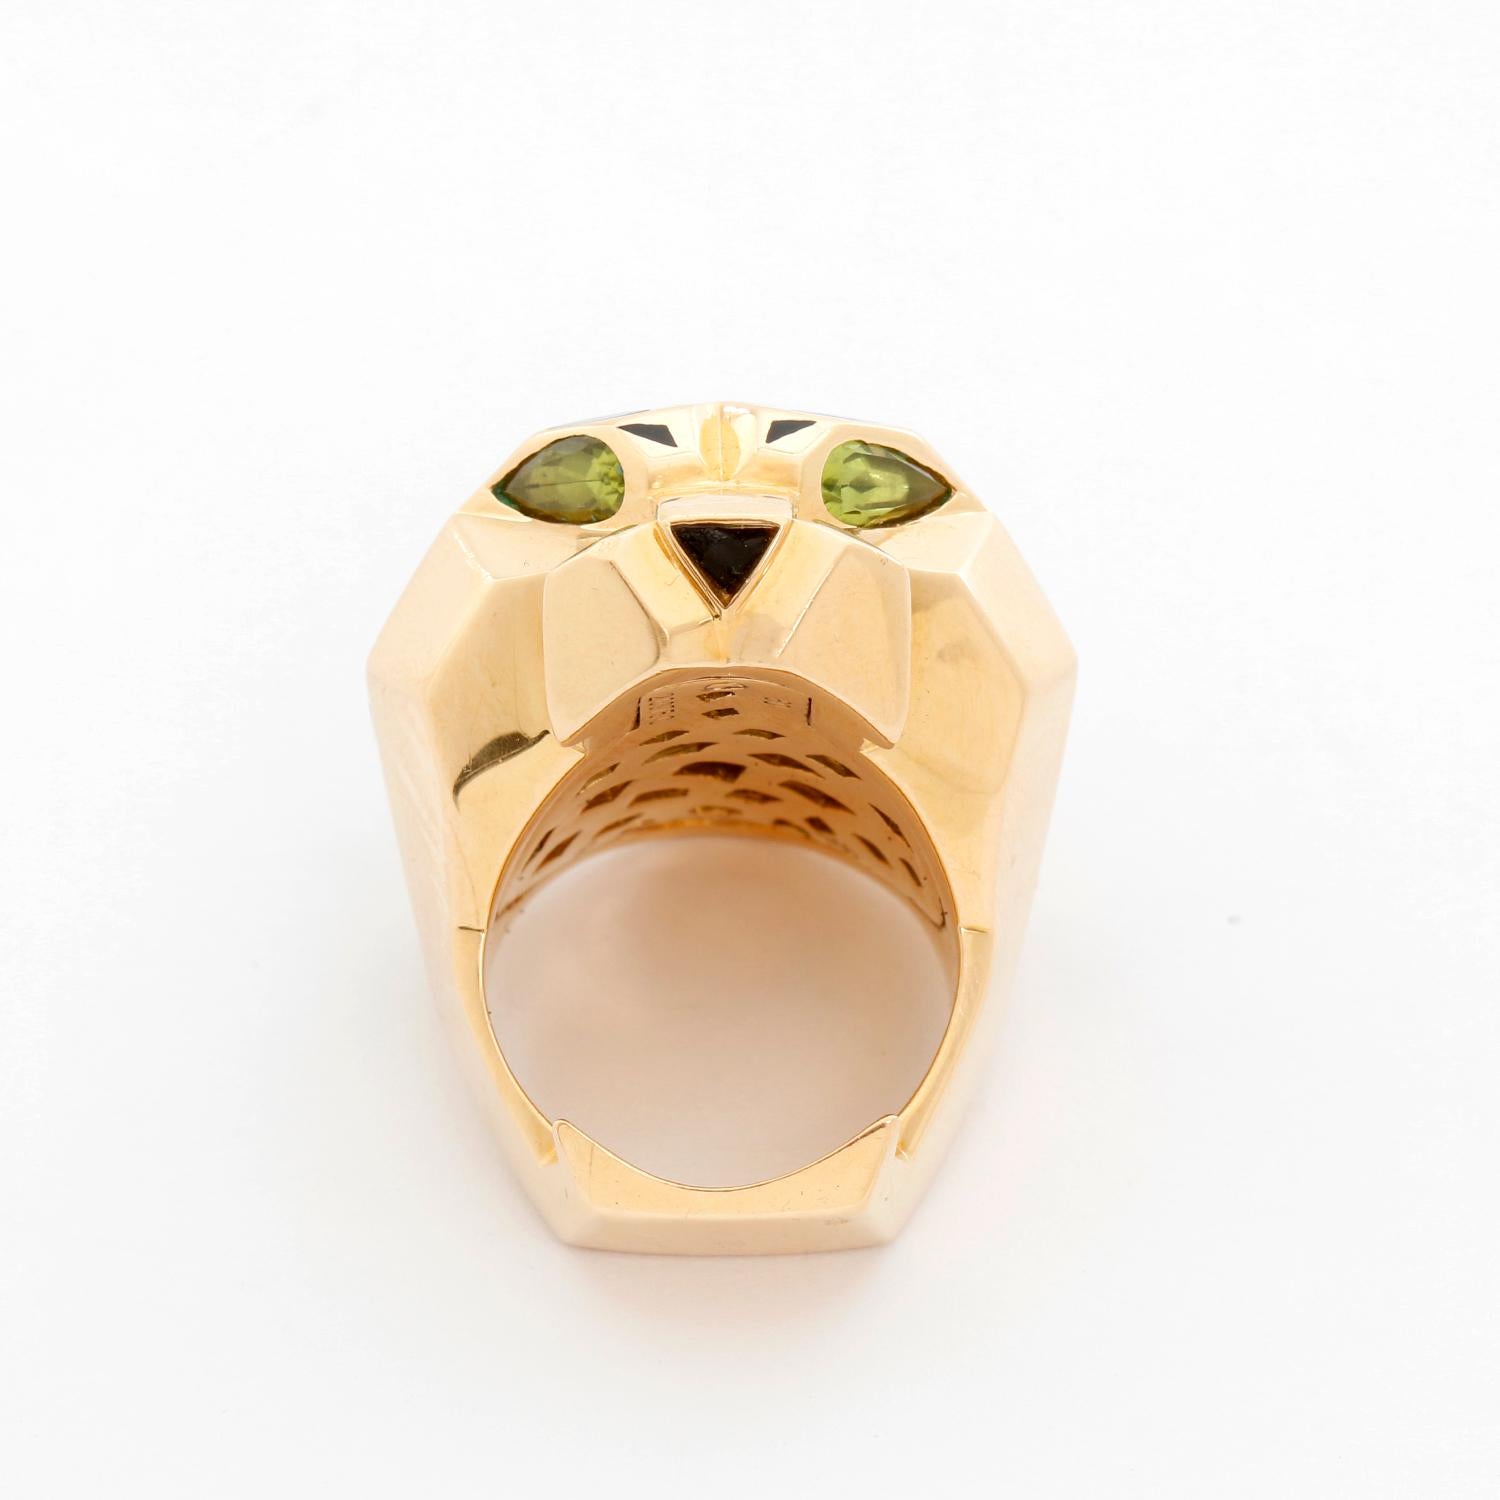 Cartier Panthere De Cartier Ring Size 9 - 18K Yellow gold ring in the shape of an open mouth panther with black Lacquer spots, Peridot eyes, and a black Onyx nose. . Pre-owned with box and papers.